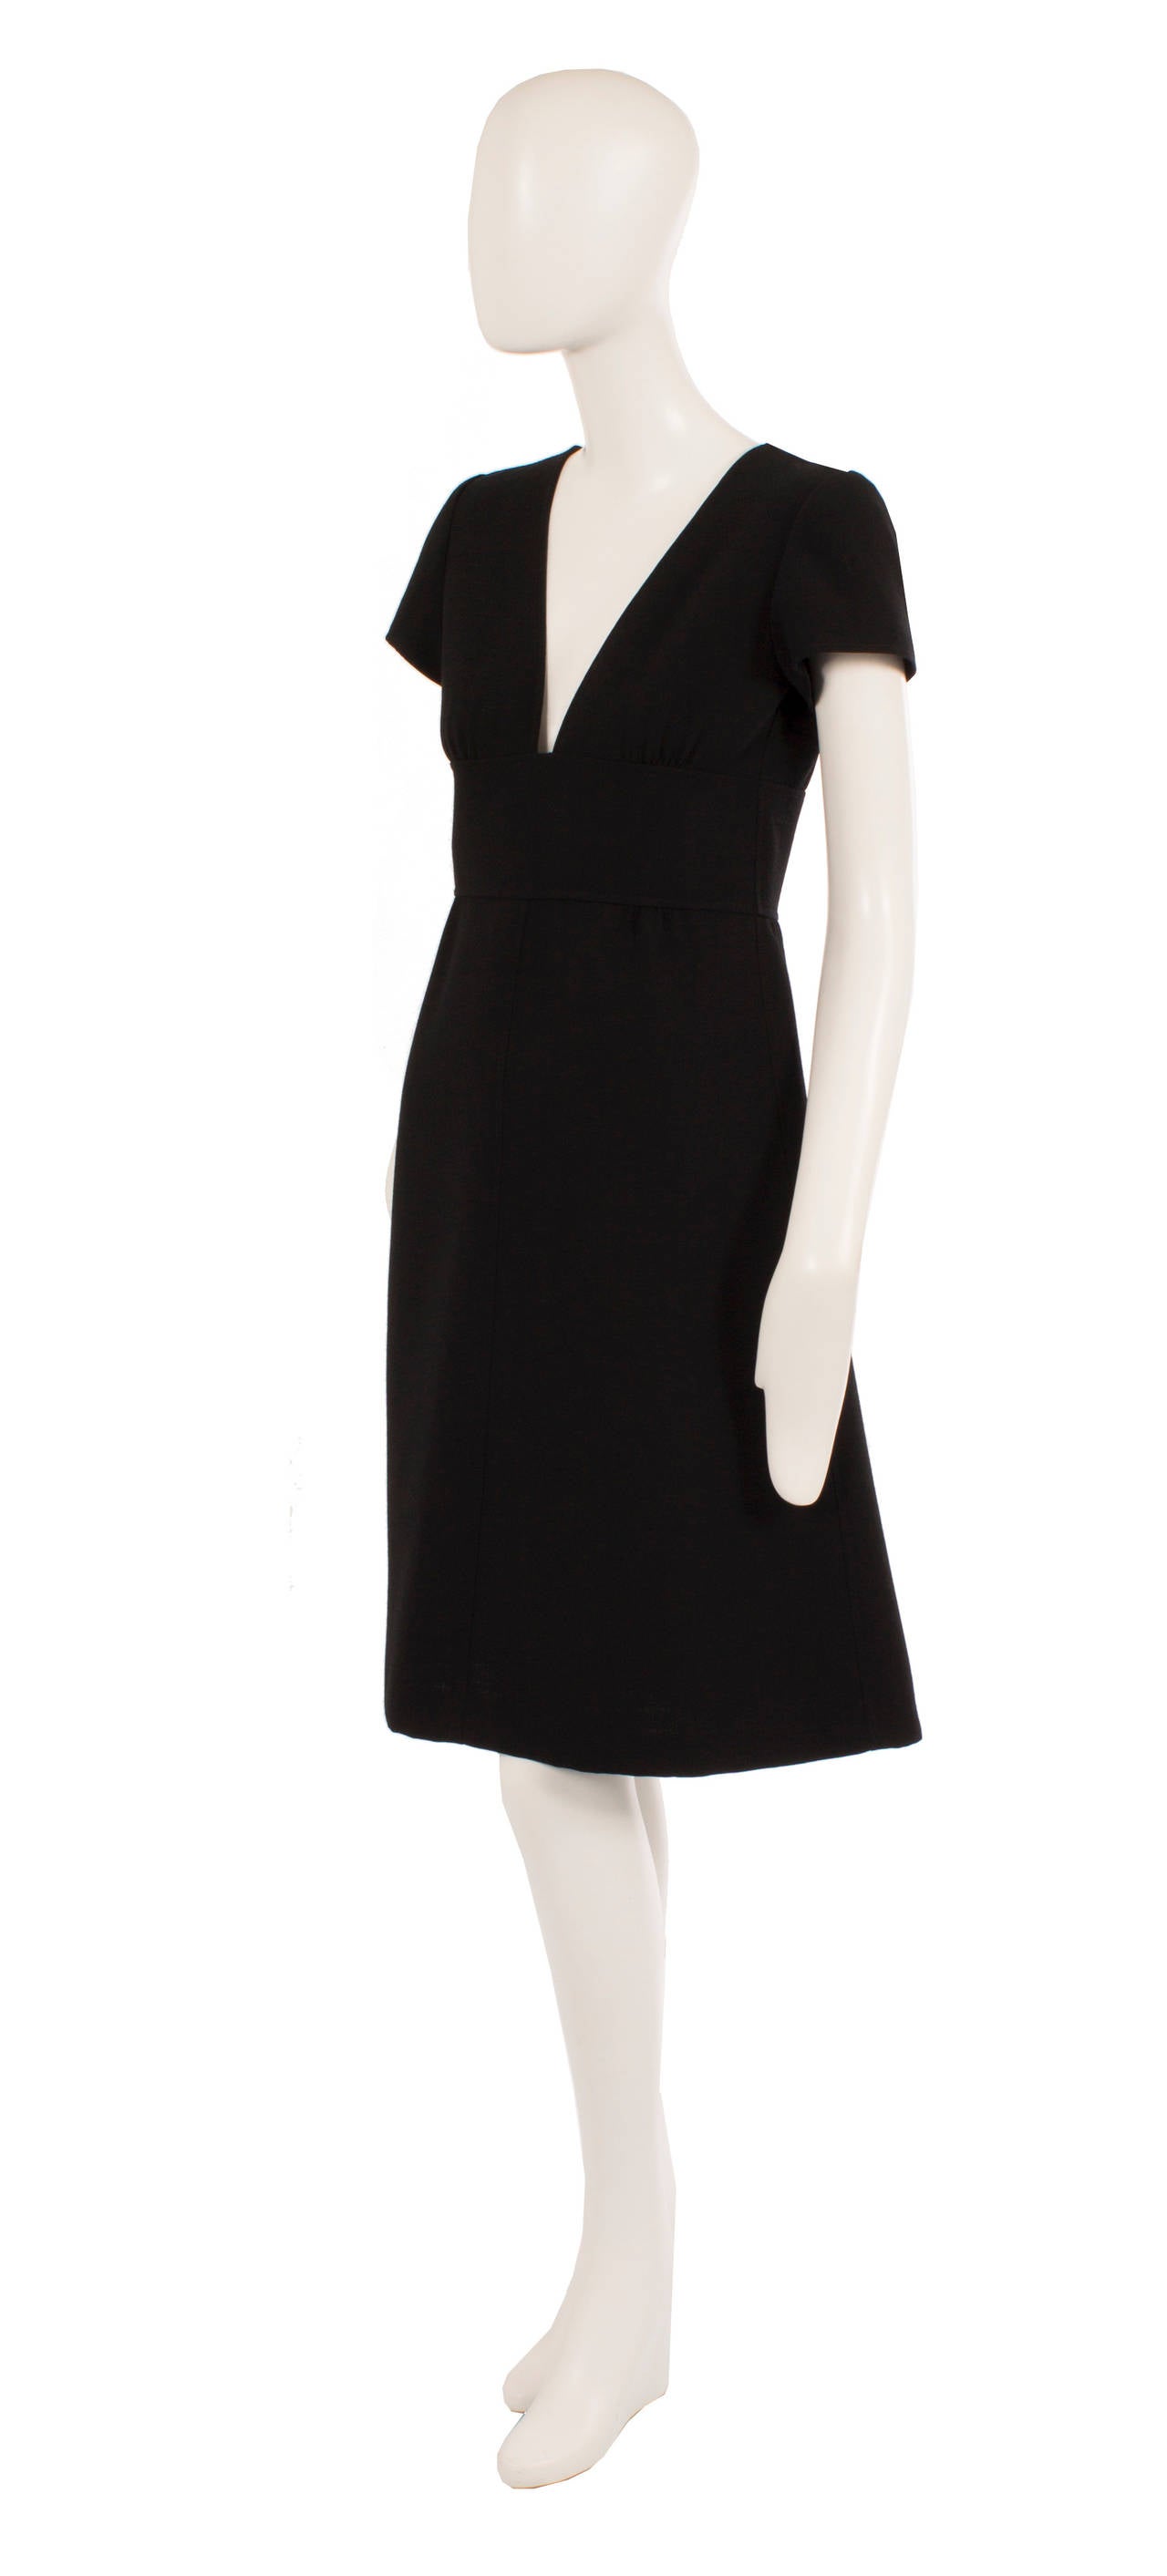 This classic little black dress by Courrèges Couture Future is an amazingly contemporary piece. The capped sleeves and A-line silhouette make it a great option for daytime, while the plunging neckline reveals just the right amount of décolletage